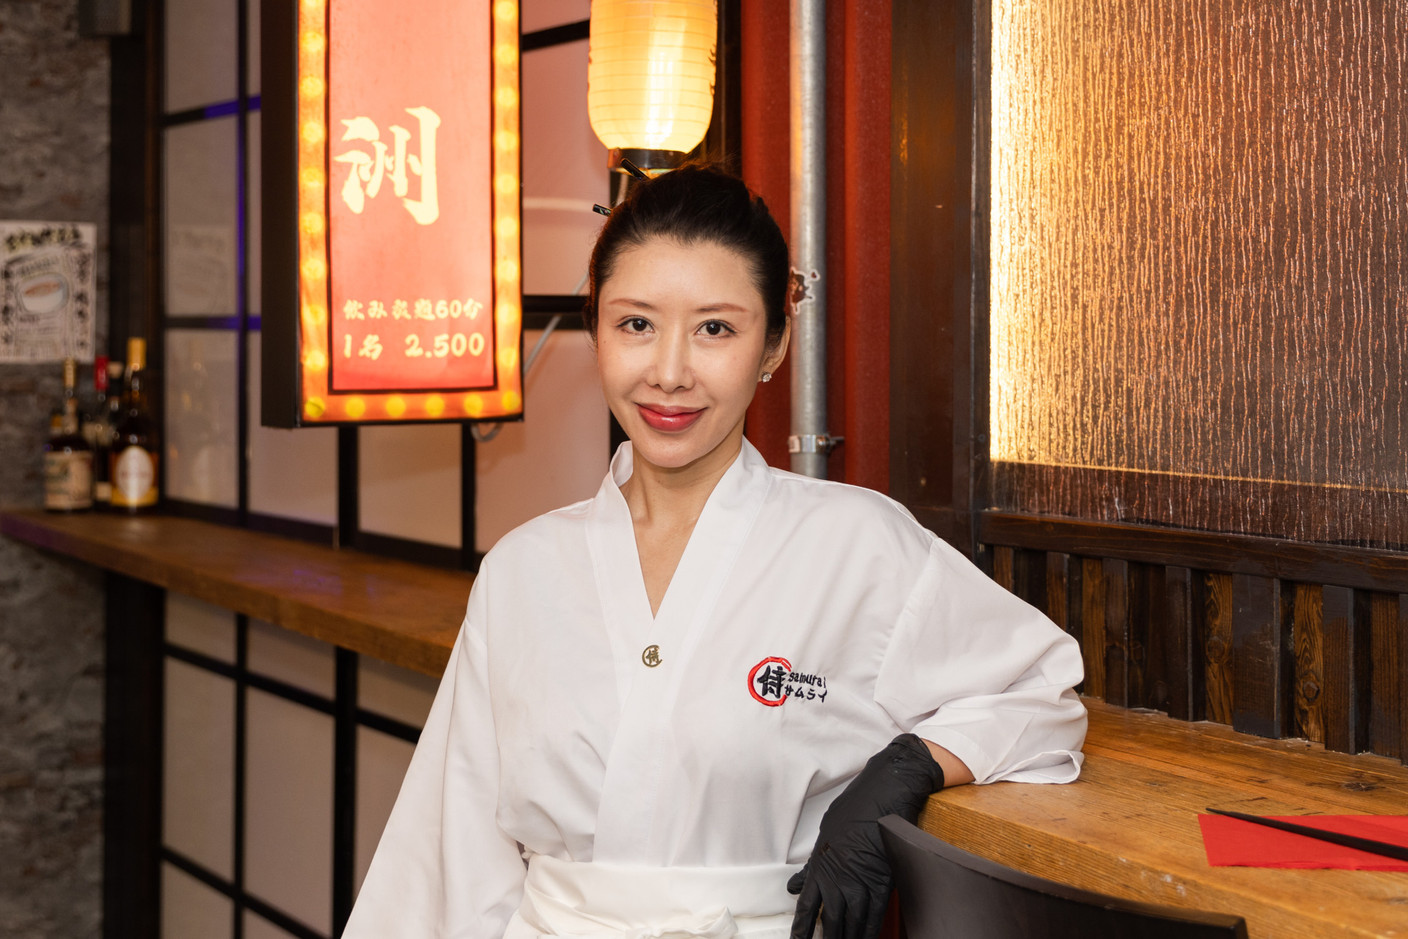 Chef Florence Chen previously worked at the Fontaine de Flore in Weiler-la-Tour. Photo: Romain Gamba / Maison Moderne